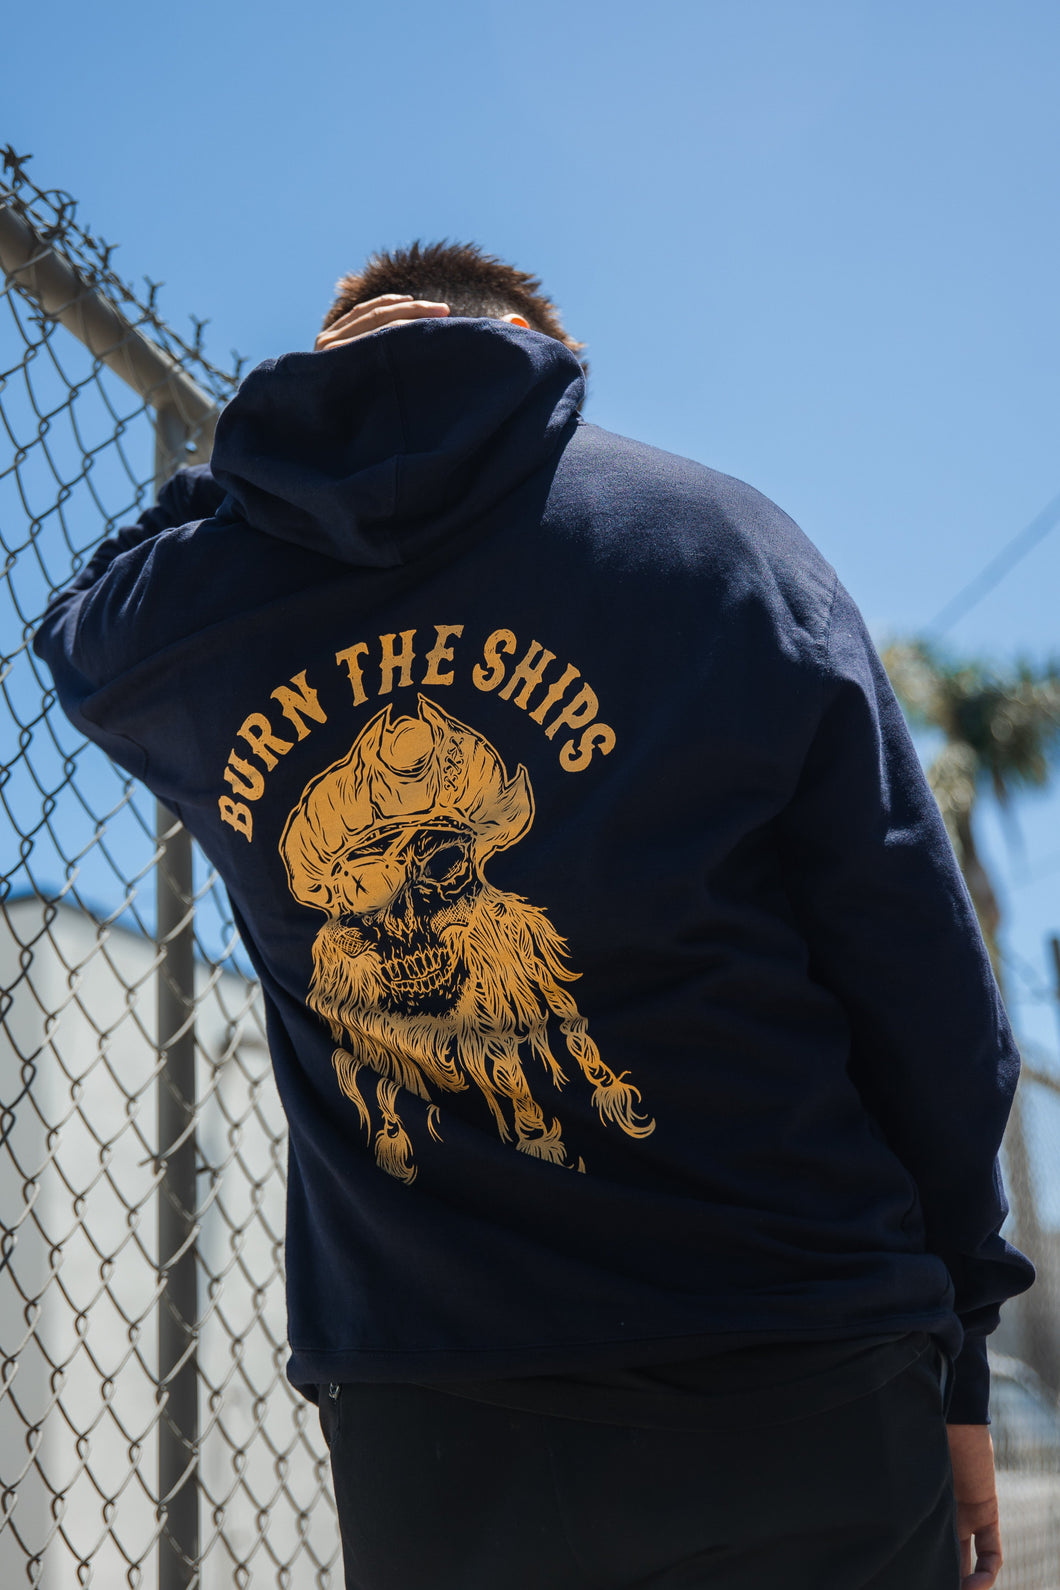 Burn The Ships Navy Gold Foil Hoodie